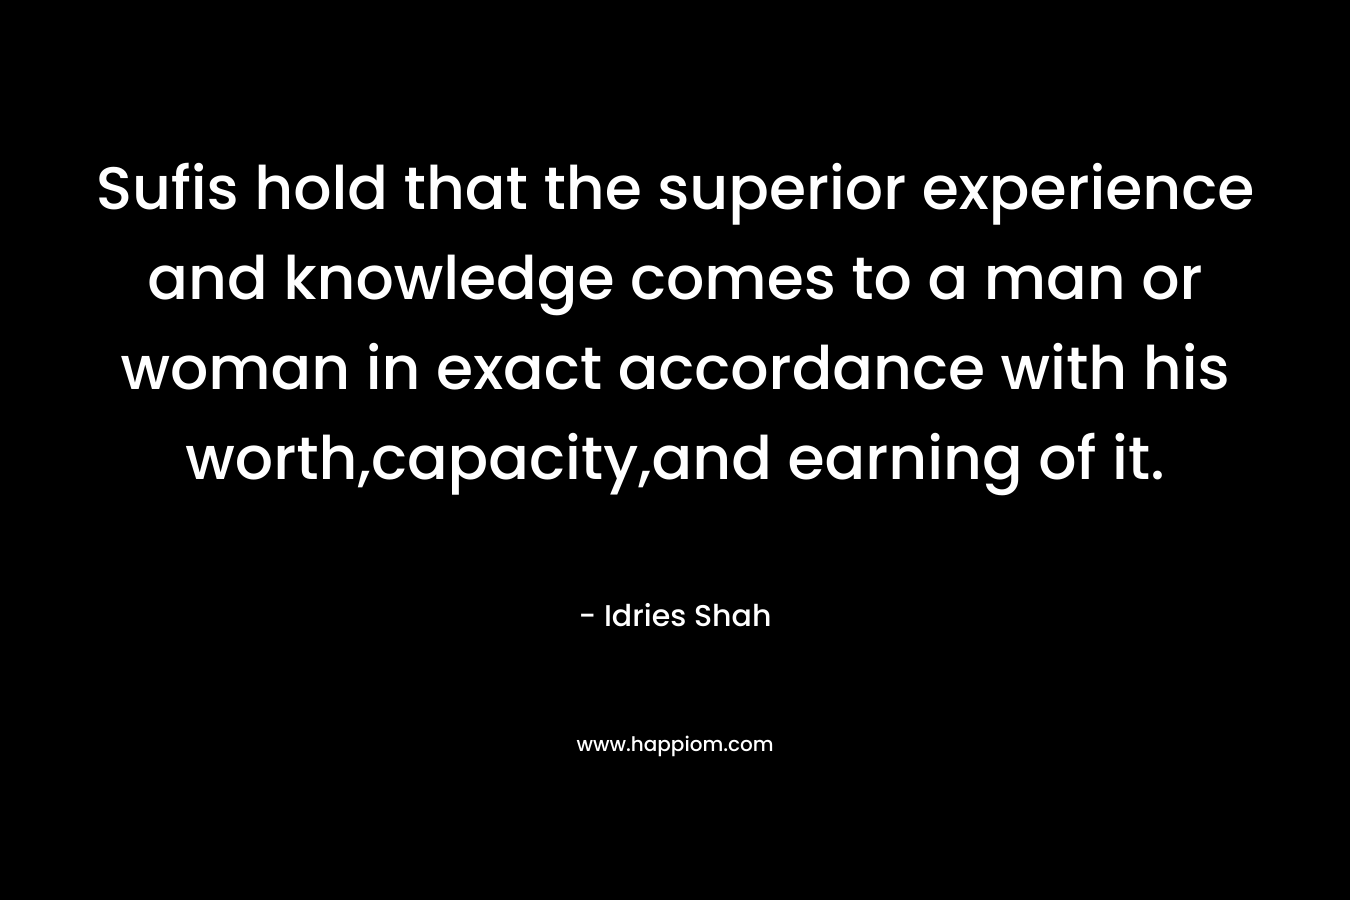 Sufis hold that the superior experience and knowledge comes to a man or woman in exact accordance with his worth,capacity,and earning of it.